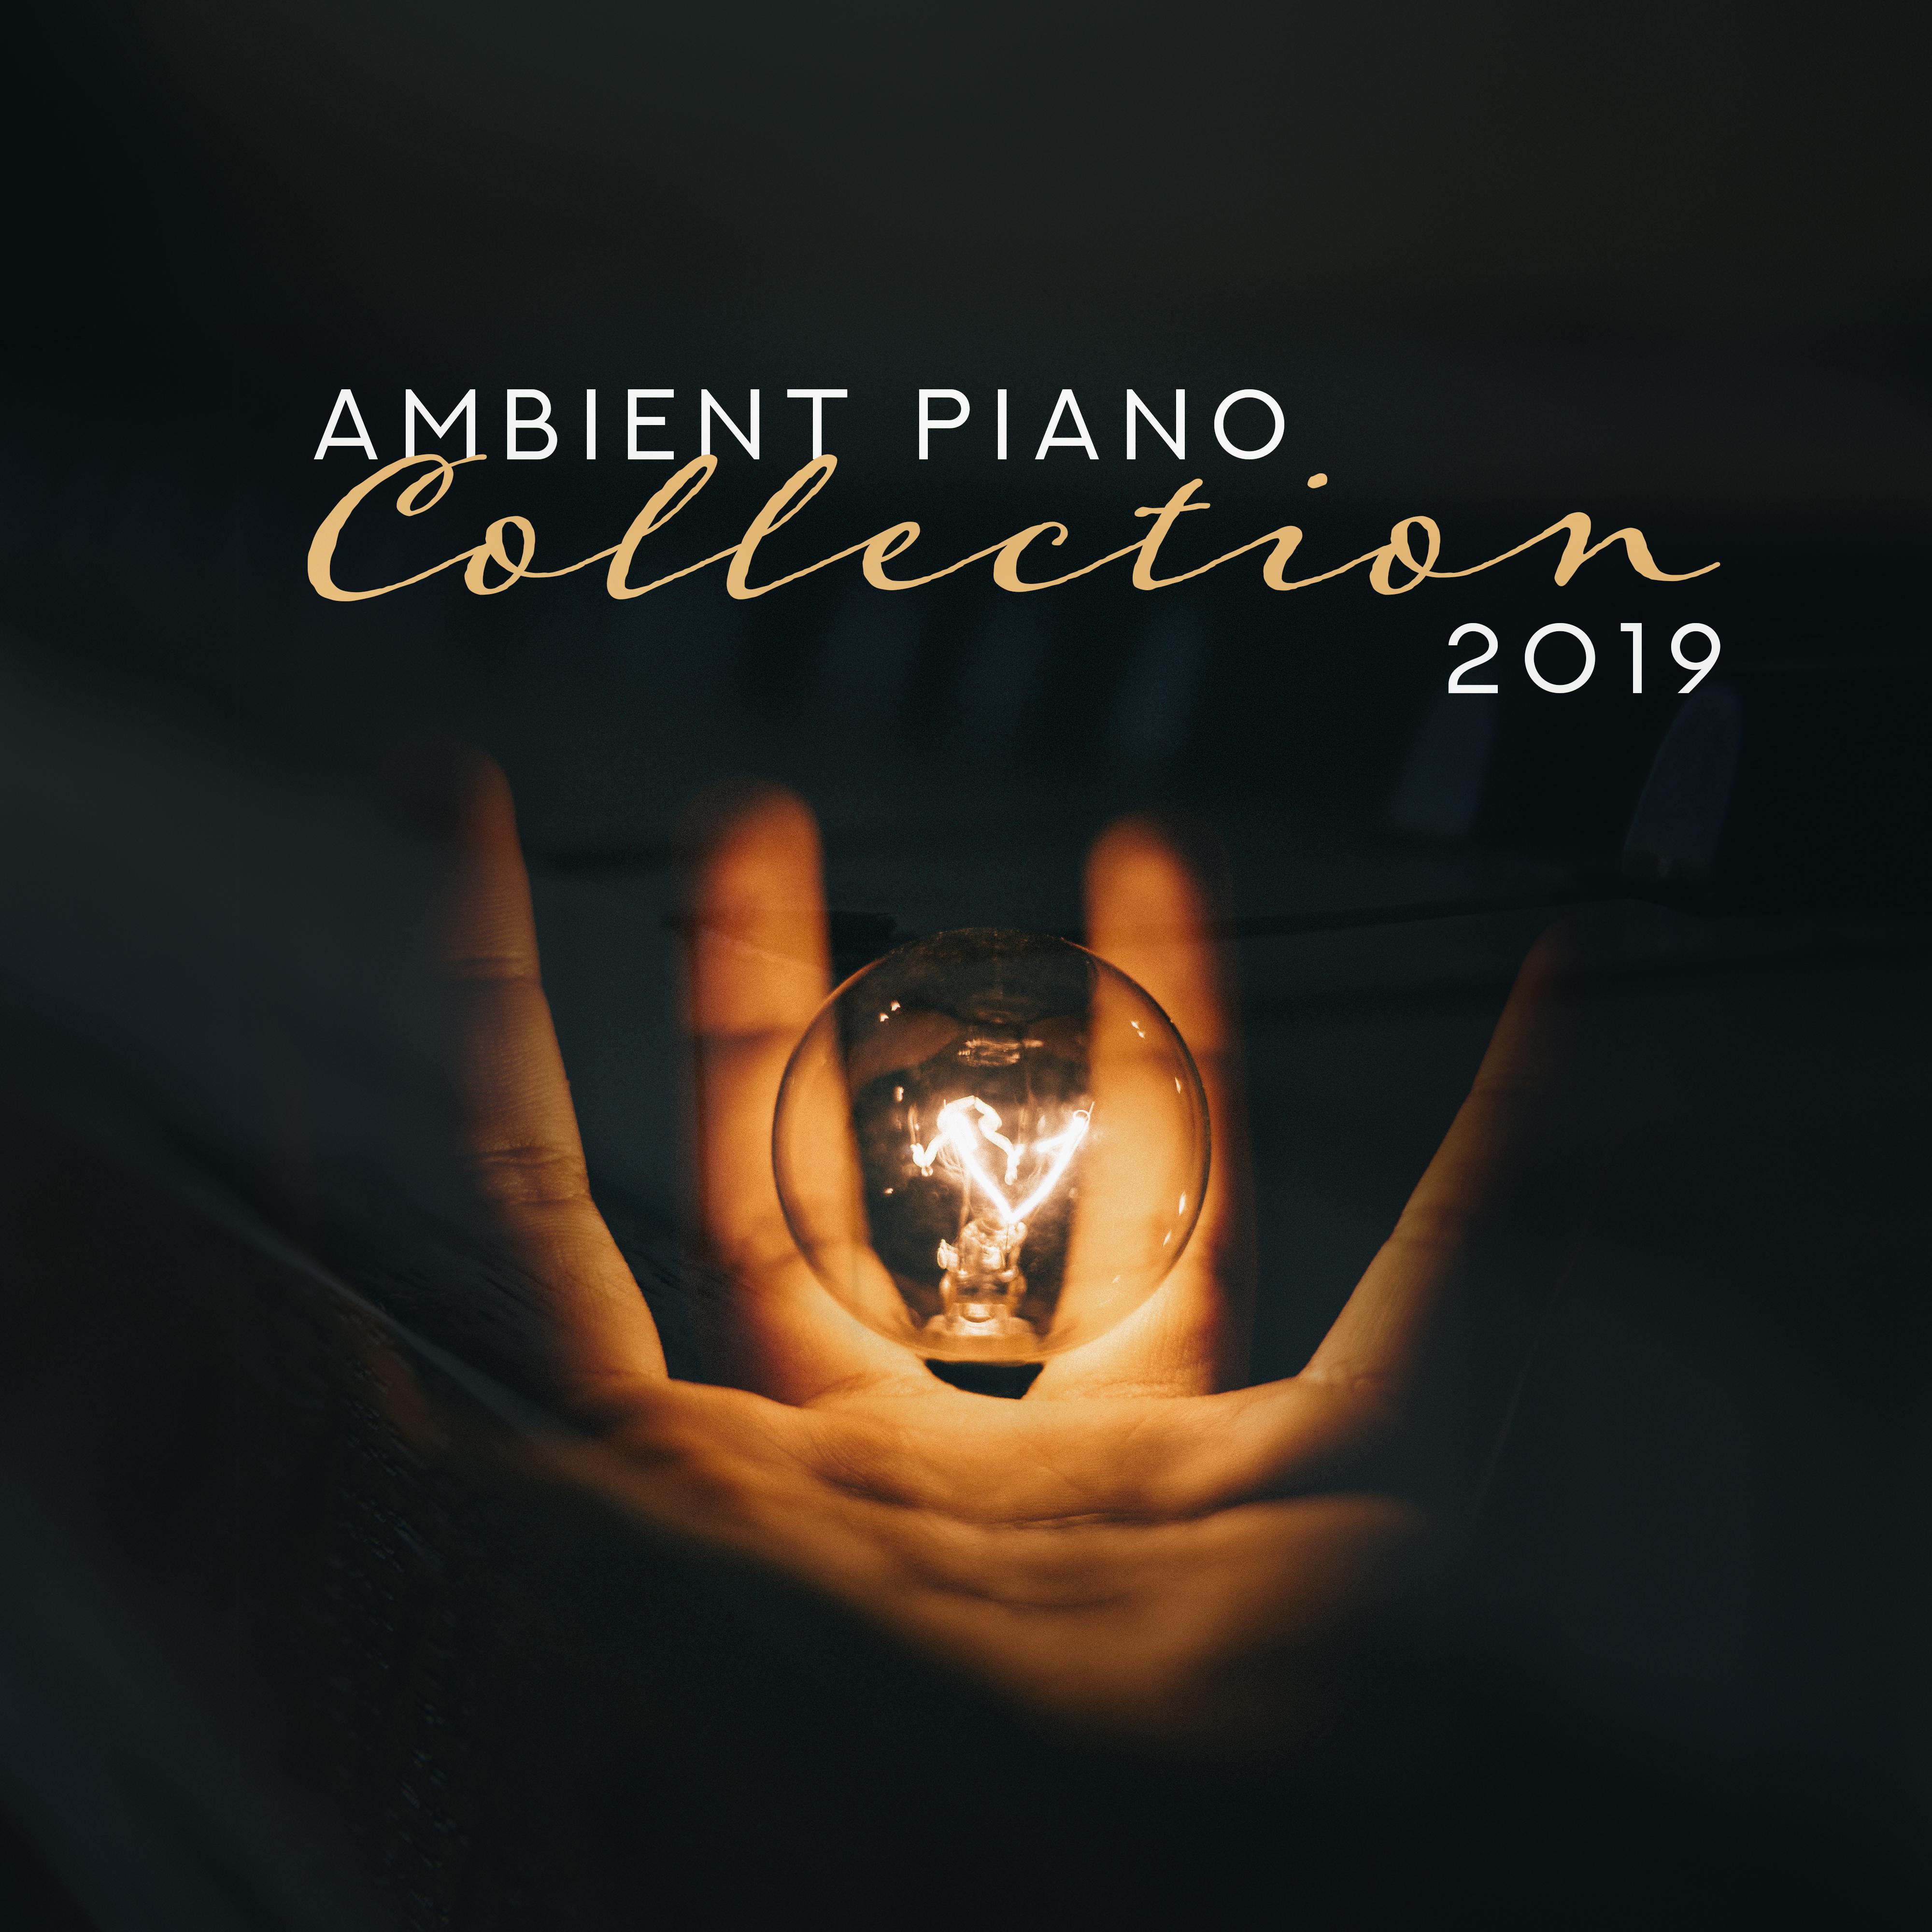 Ambient Piano Collection 2019 – Gentle Piano Music, Relaxing Jazz, Beautiful Sounds of Piano to Rest, Jazz Music Ambient, Smooth Jazz